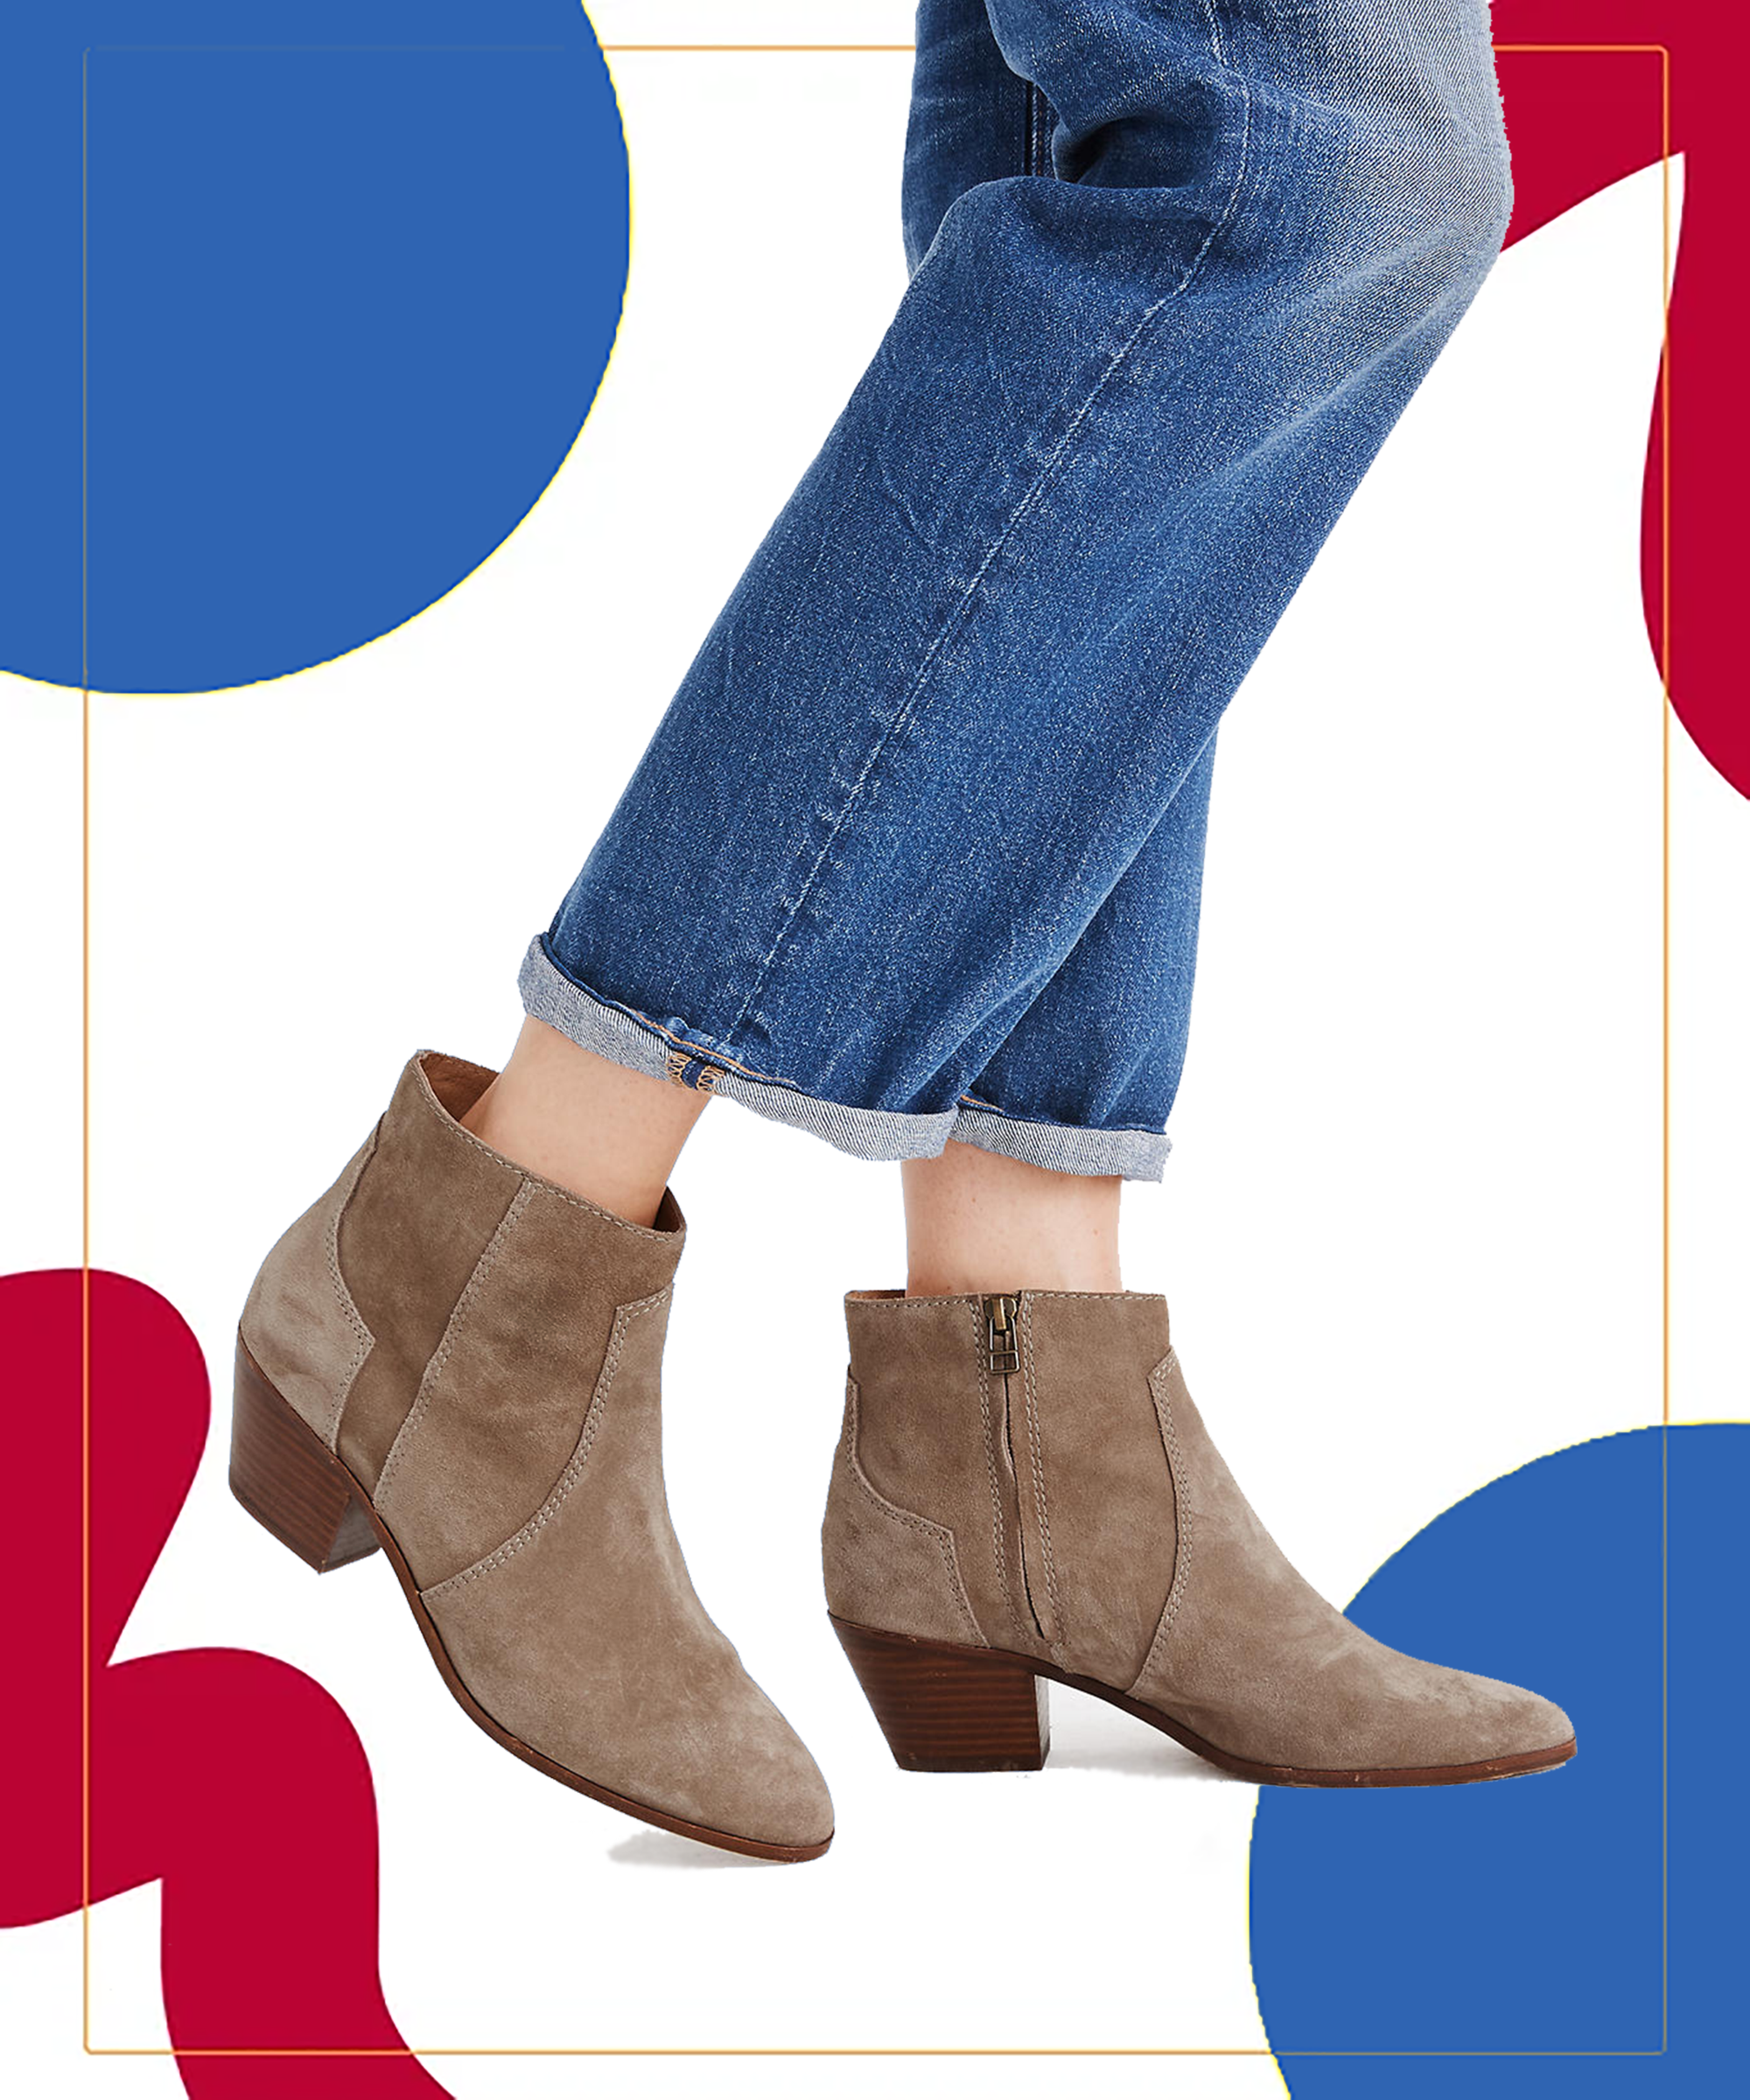 black friday deals on ladies boots